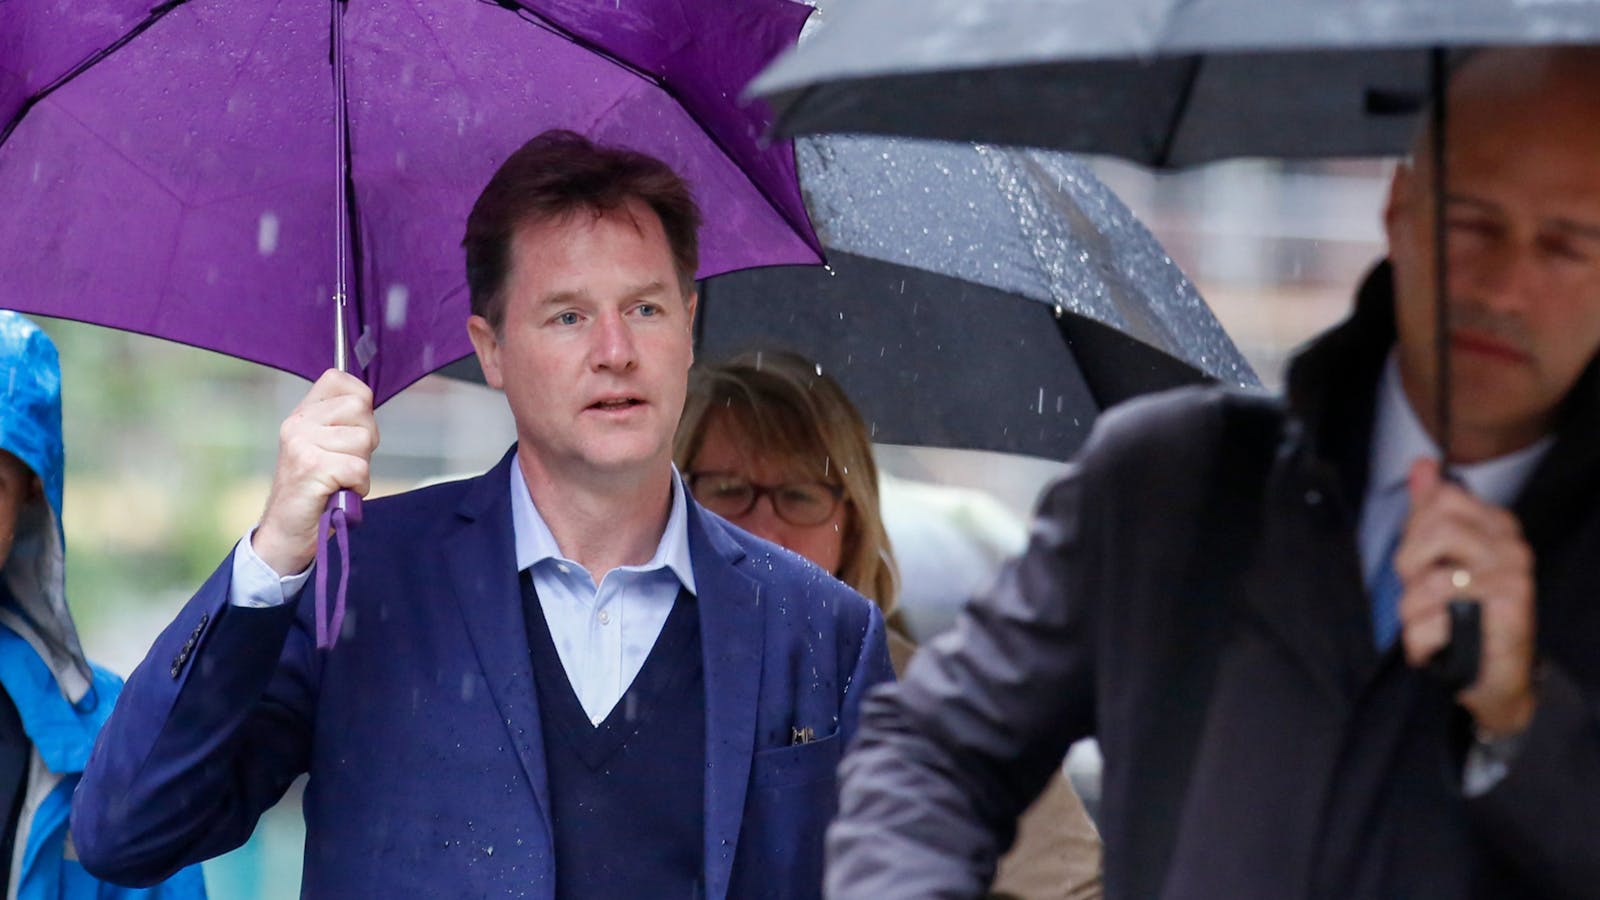 Meta Platforms President Nick Clegg in 2017, before he joined the company. Photo by Bloomberg